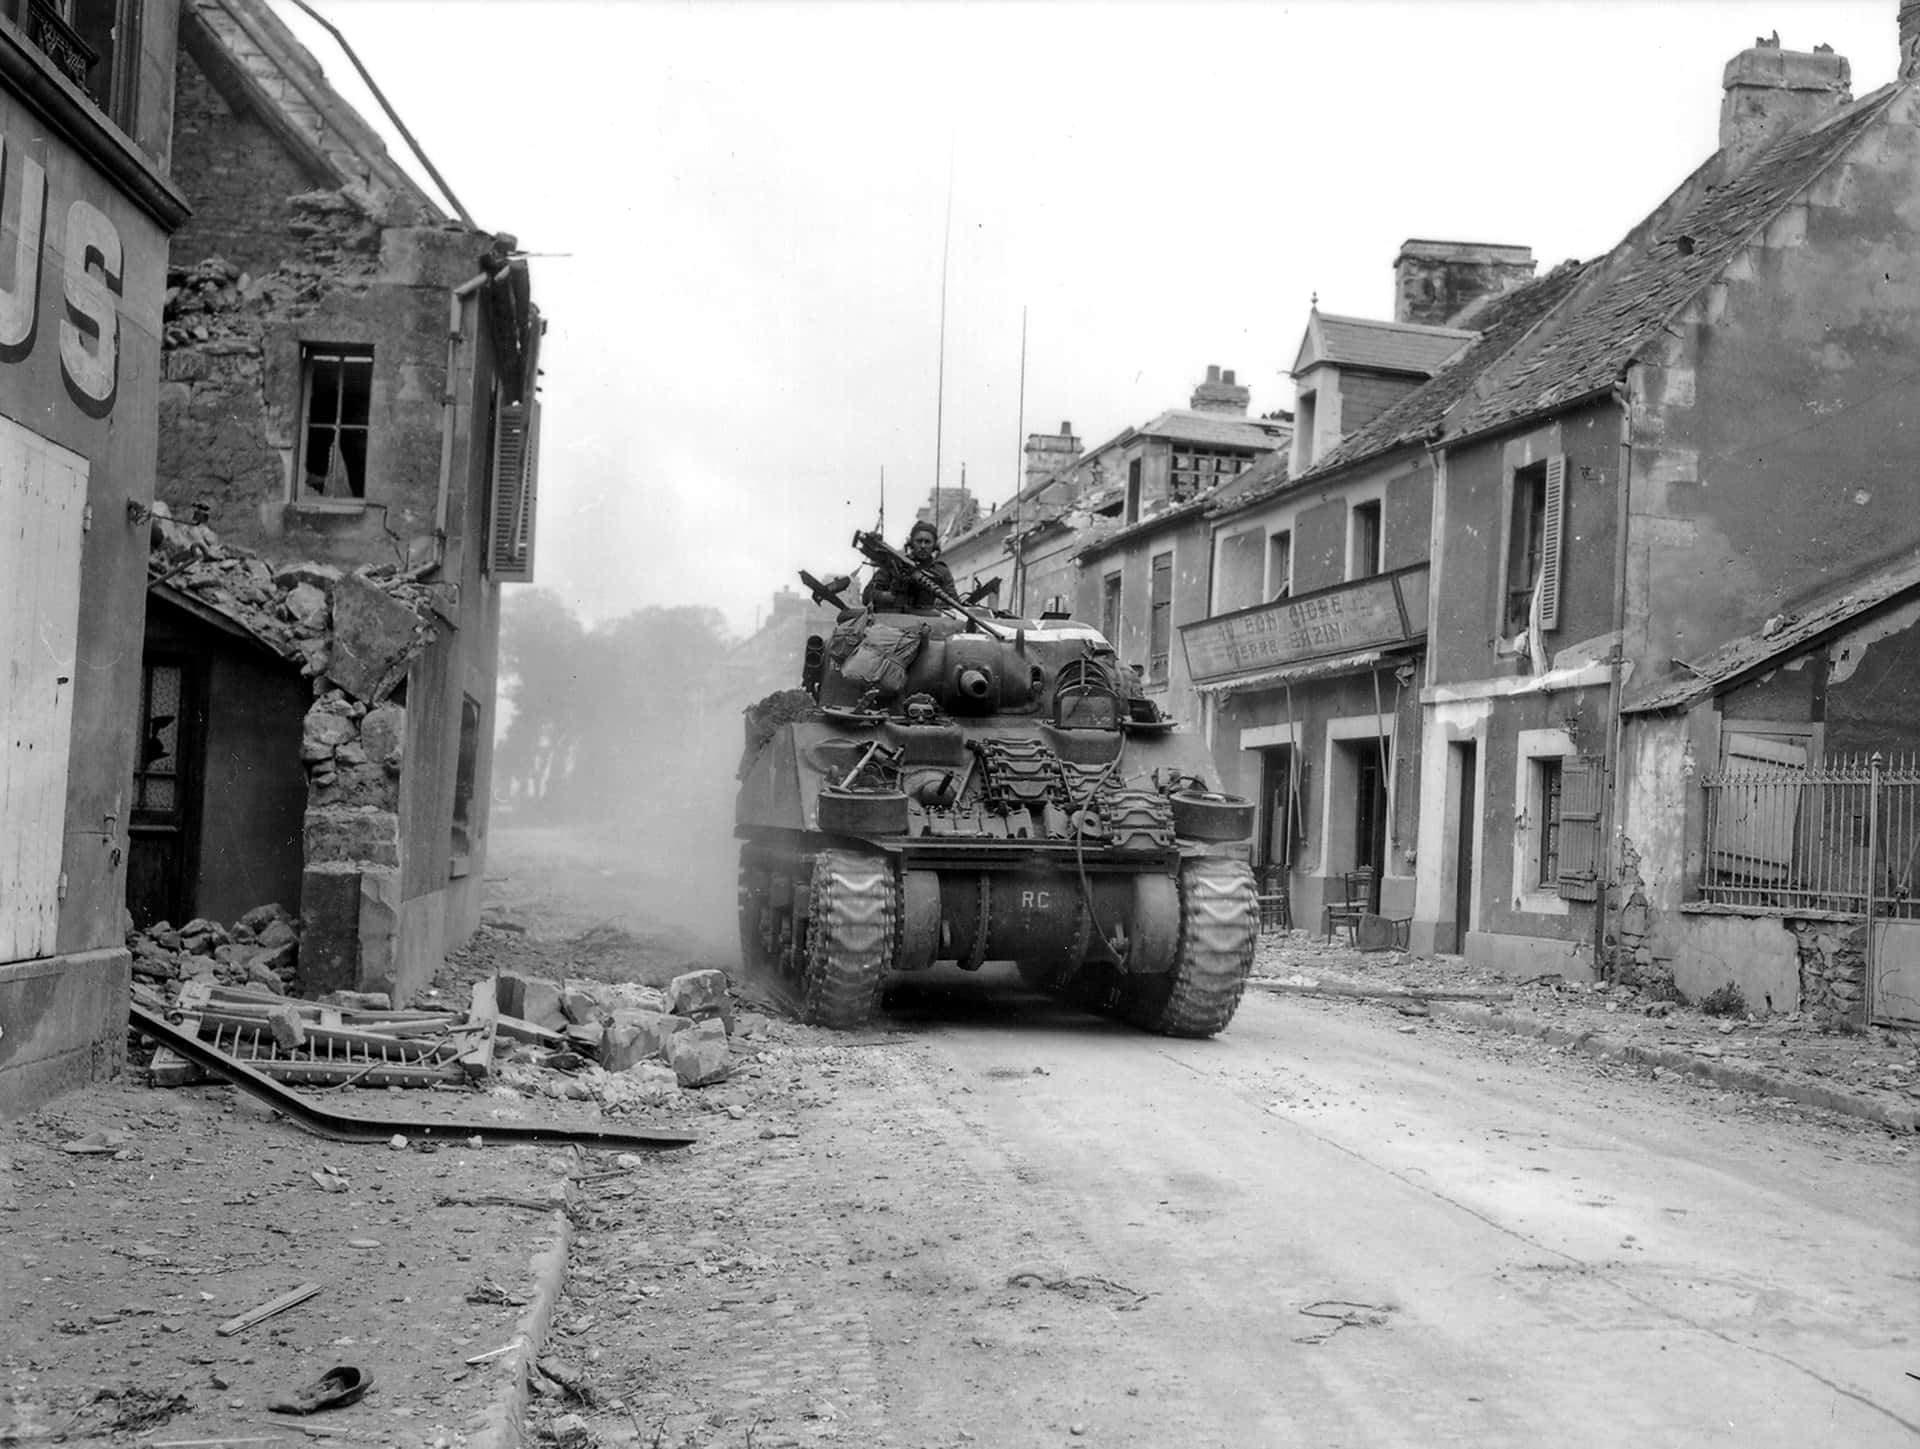 M4 Tank In A Destroyed Town